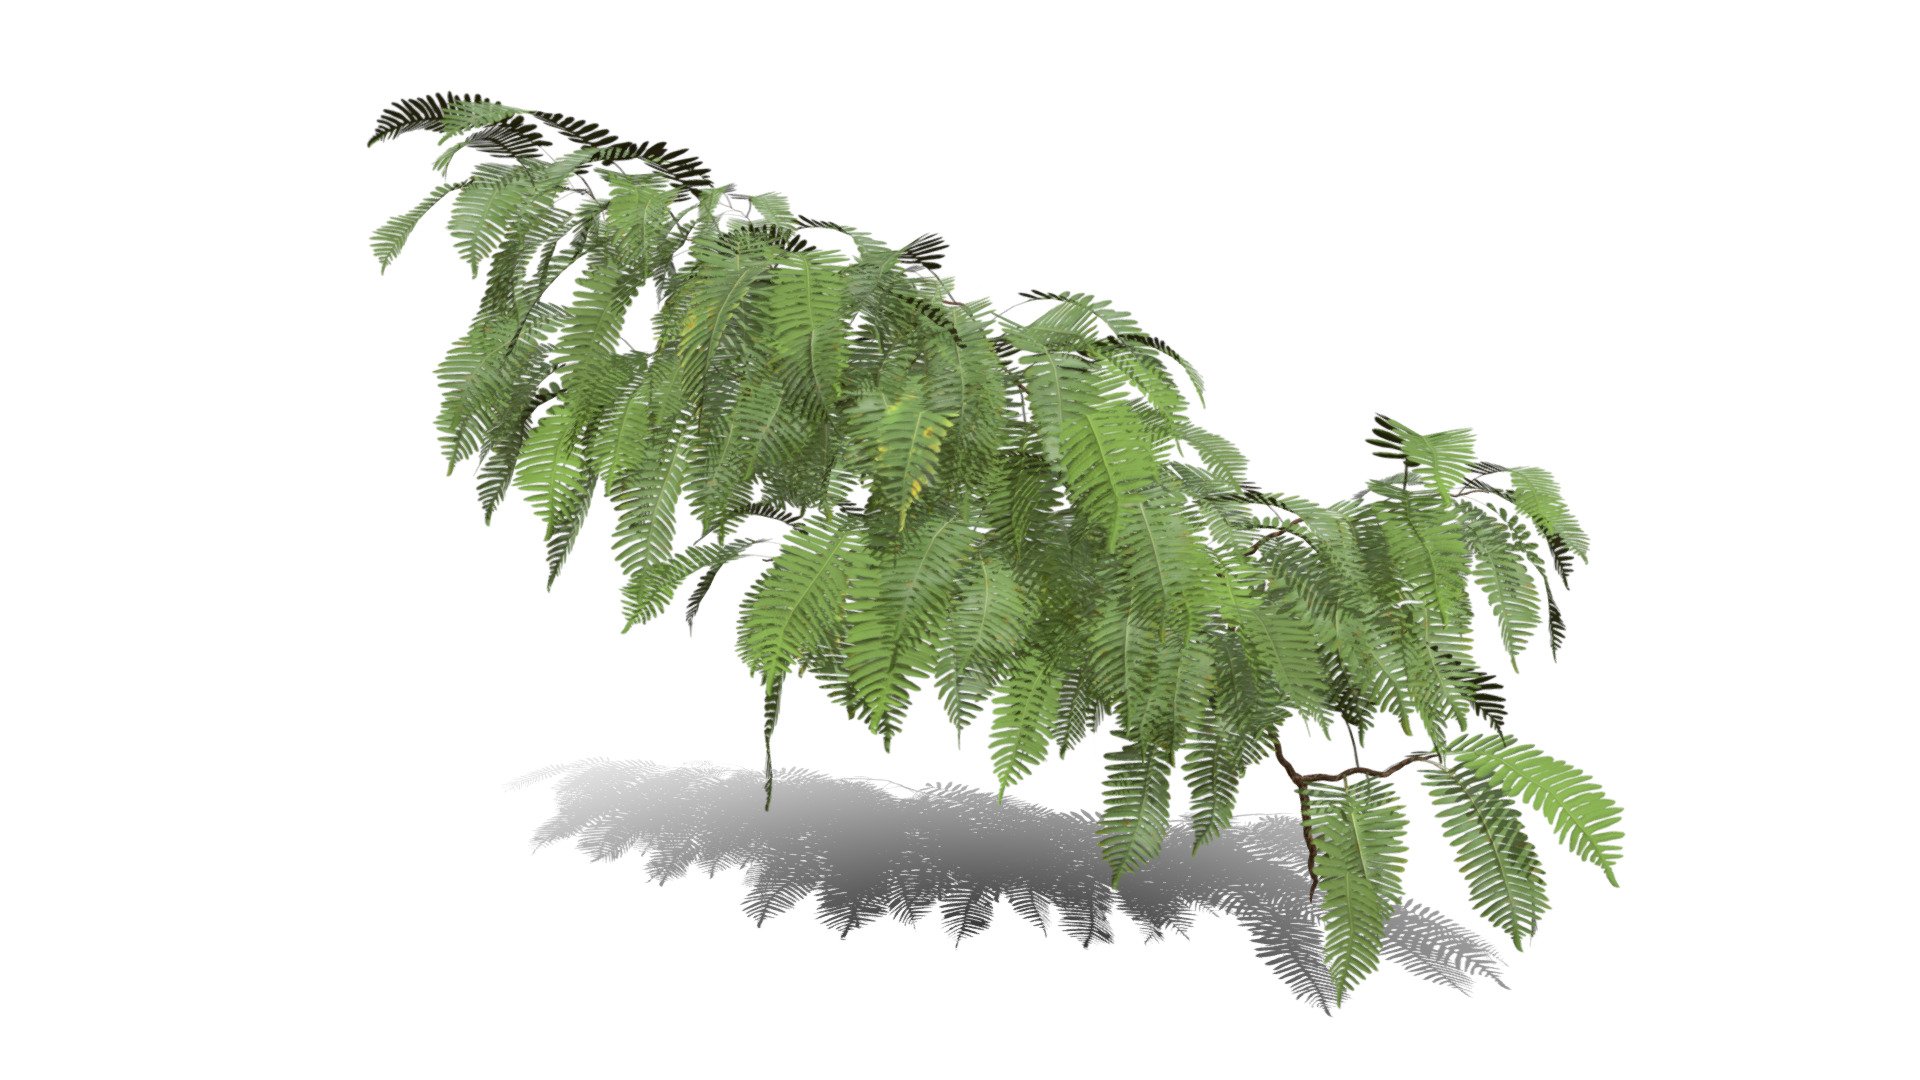 Model specs:





Species Latin name: Polypodium vulgare




Species Common name: Common polypody fern




Preset name: Wall growth 5 mat 100




Maturity stage: Old




Health stage: Thriving




Season stage: Spring




Leaves count: 213




Height: 0.9 meters




LODs included: Yes




Mesh type: static




Vertex colors: (R) Material blending, (A) Ambient occlusion



Better used for Hi Poly workflows!

Species description:





Region: Europe,North America,Asia, Africa,Middle East




Biomes: Forest,Wetland




Climatic Zones: Cold temperate,Warm temperate,Mediterranean




Plant type: Fern



This PlantCatalog mesh was exported at 40% of its maximum mesh resolution. With the full PlantCatalog, customize hundreds of procedural models + apply wind animations + convert to native shaders and a lot more: https://info.e-onsoftware.com/plantcatalog/ - Realistic HD Common polypody fern (25/55) - Buy Royalty Free 3D model by PlantCatalog 3d model